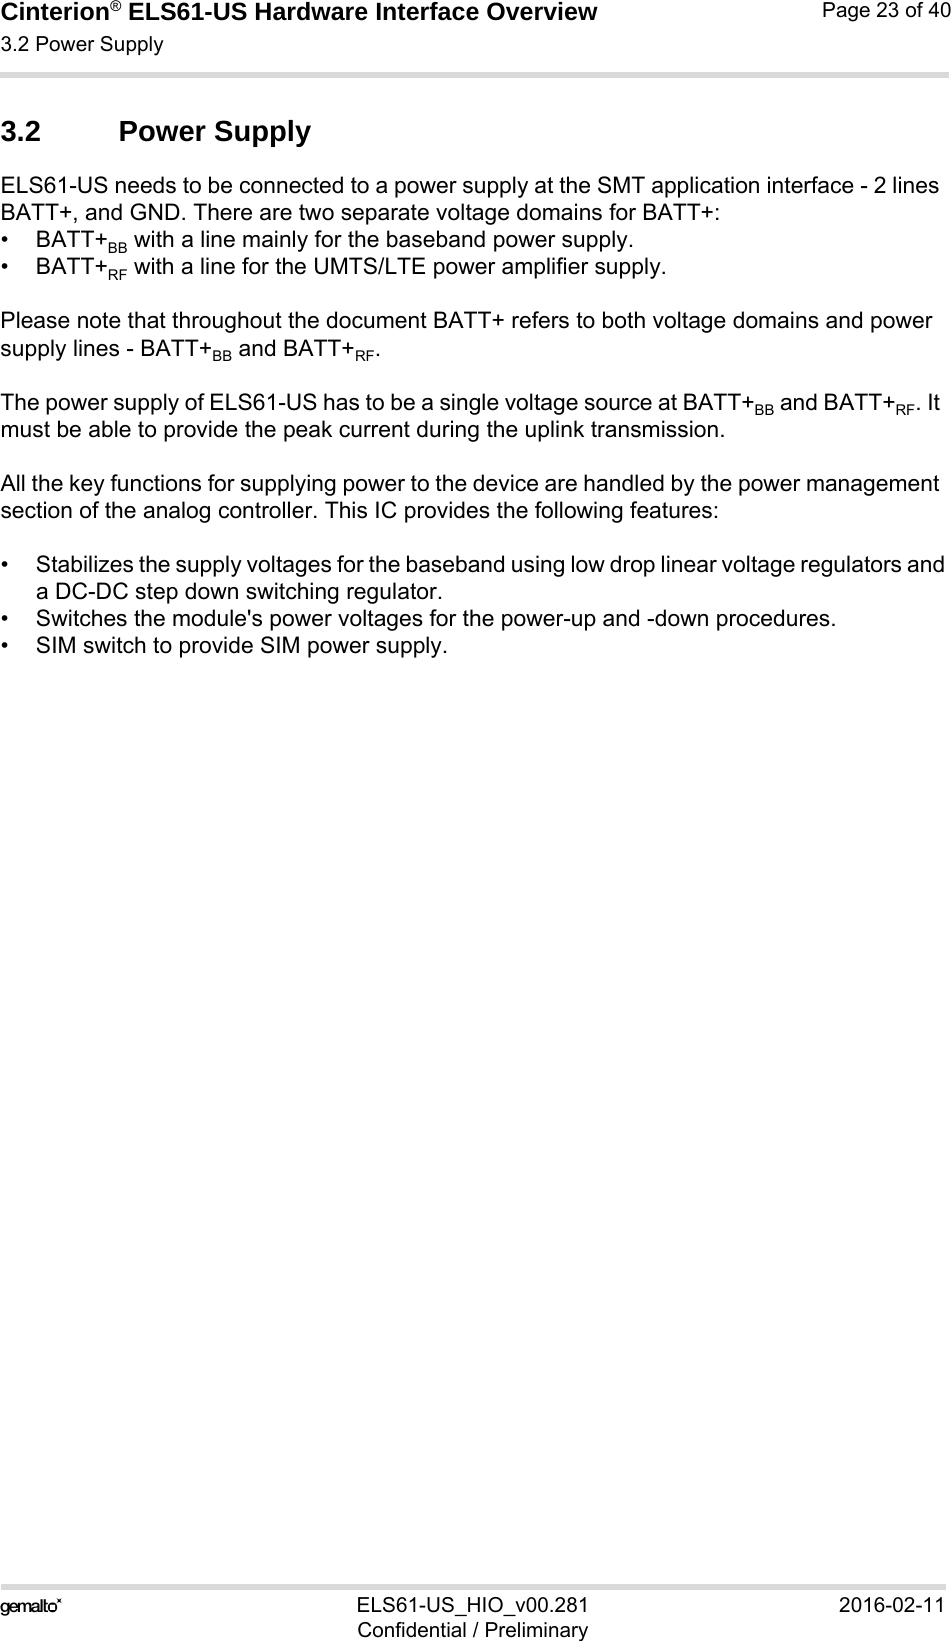 Cinterion® ELS61-US Hardware Interface Overview3.2 Power Supply23ELS61-US_HIO_v00.281 2016-02-11Confidential / PreliminaryPage 23 of 403.2 Power SupplyELS61-US needs to be connected to a power supply at the SMT application interface - 2 lines BATT+, and GND. There are two separate voltage domains for BATT+:•BATT+BB with a line mainly for the baseband power supply.•BATT+RF with a line for the UMTS/LTE power amplifier supply.Please note that throughout the document BATT+ refers to both voltage domains and power supply lines - BATT+BB and BATT+RF.The power supply of ELS61-US has to be a single voltage source at BATT+BB and BATT+RF. It must be able to provide the peak current during the uplink transmission. All the key functions for supplying power to the device are handled by the power management section of the analog controller. This IC provides the following features:• Stabilizes the supply voltages for the baseband using low drop linear voltage regulators anda DC-DC step down switching regulator.• Switches the module&apos;s power voltages for the power-up and -down procedures.• SIM switch to provide SIM power supply.